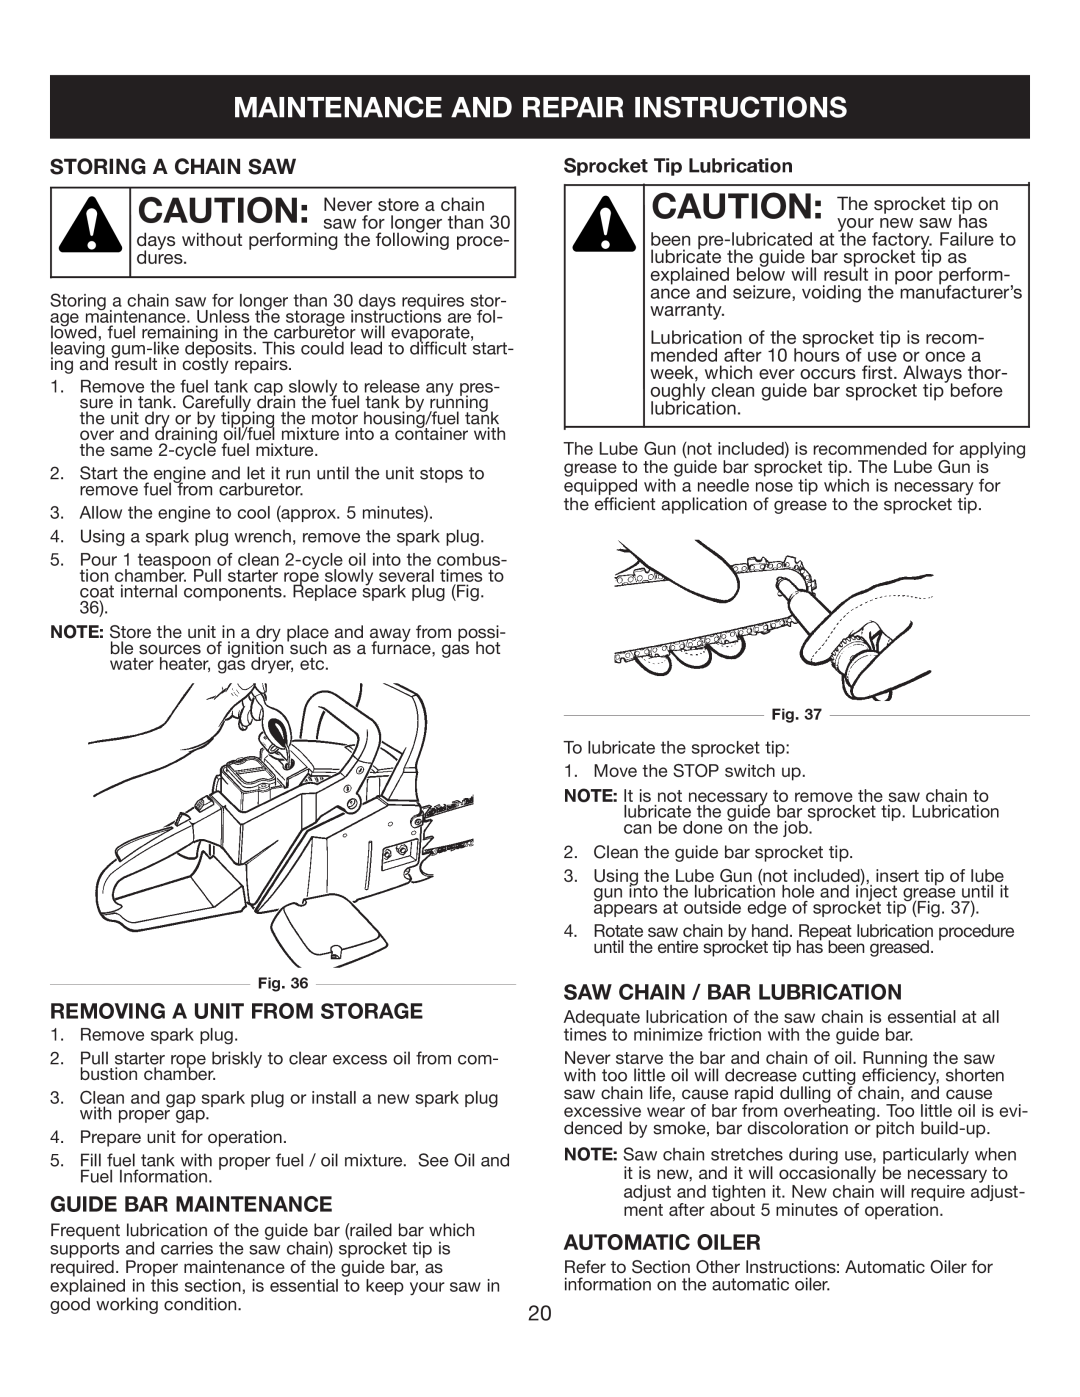 Sears 316.35084 Maintenance And Repair Instructions, Storing A Chain Saw, Removing A Unit From Storage, Automatic Oiler 